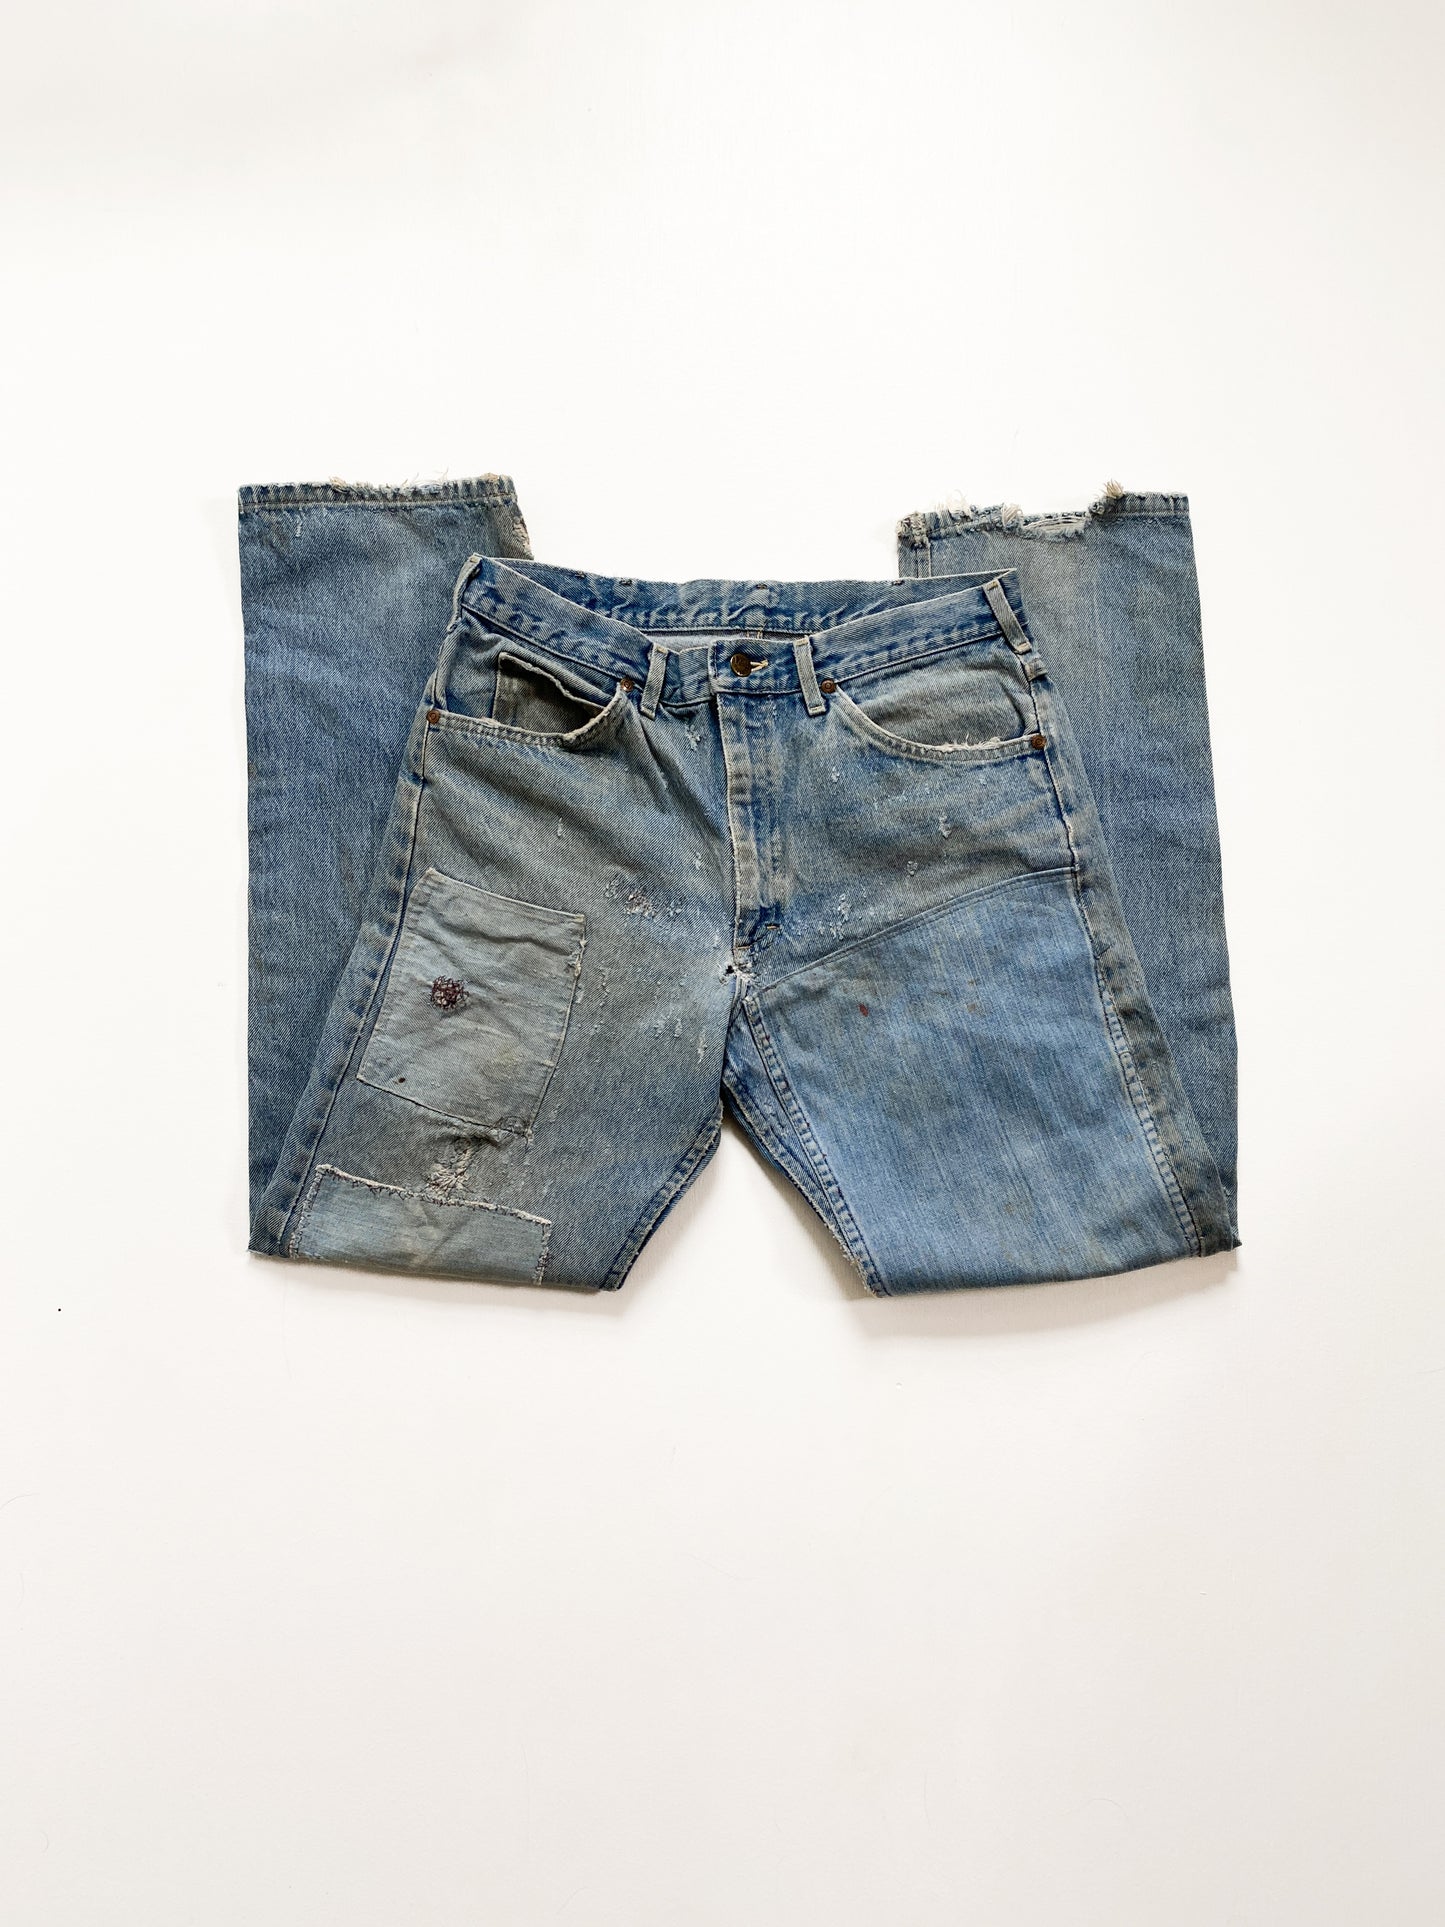 1970’s Lee 101 Rider Jeans